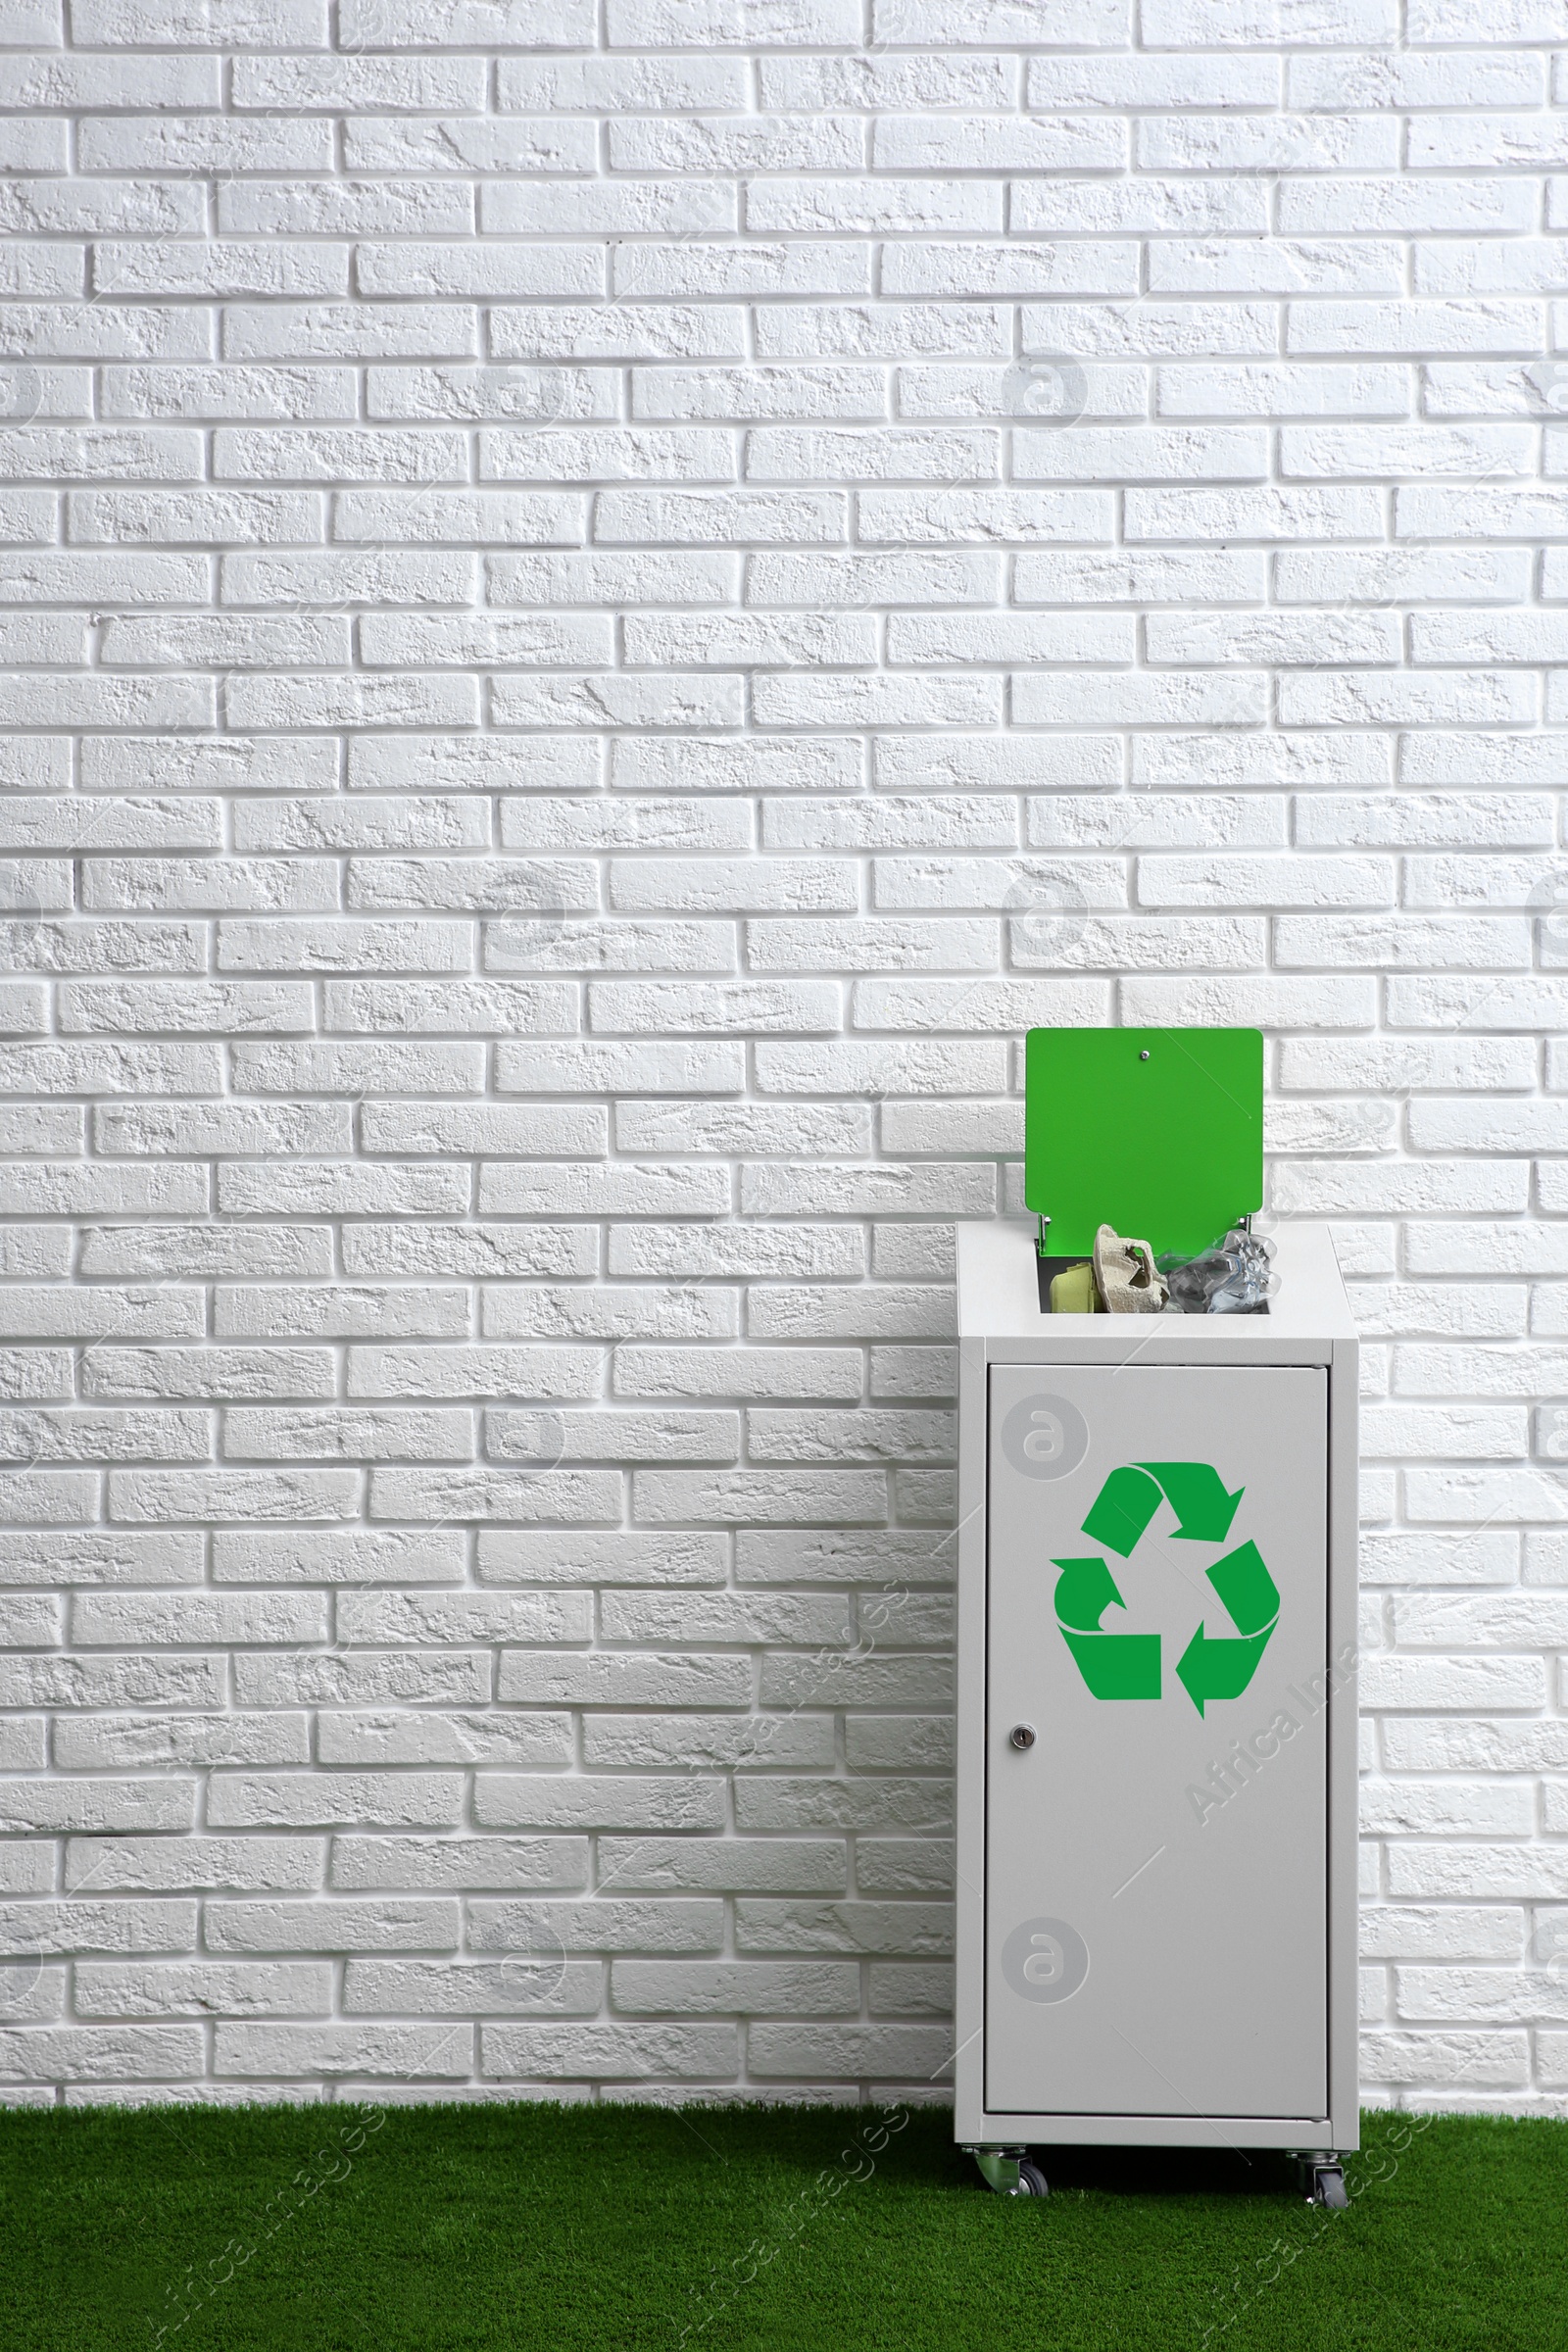 Photo of Overfilled trash bin with recycling symbol near brick wall indoors. Space for text